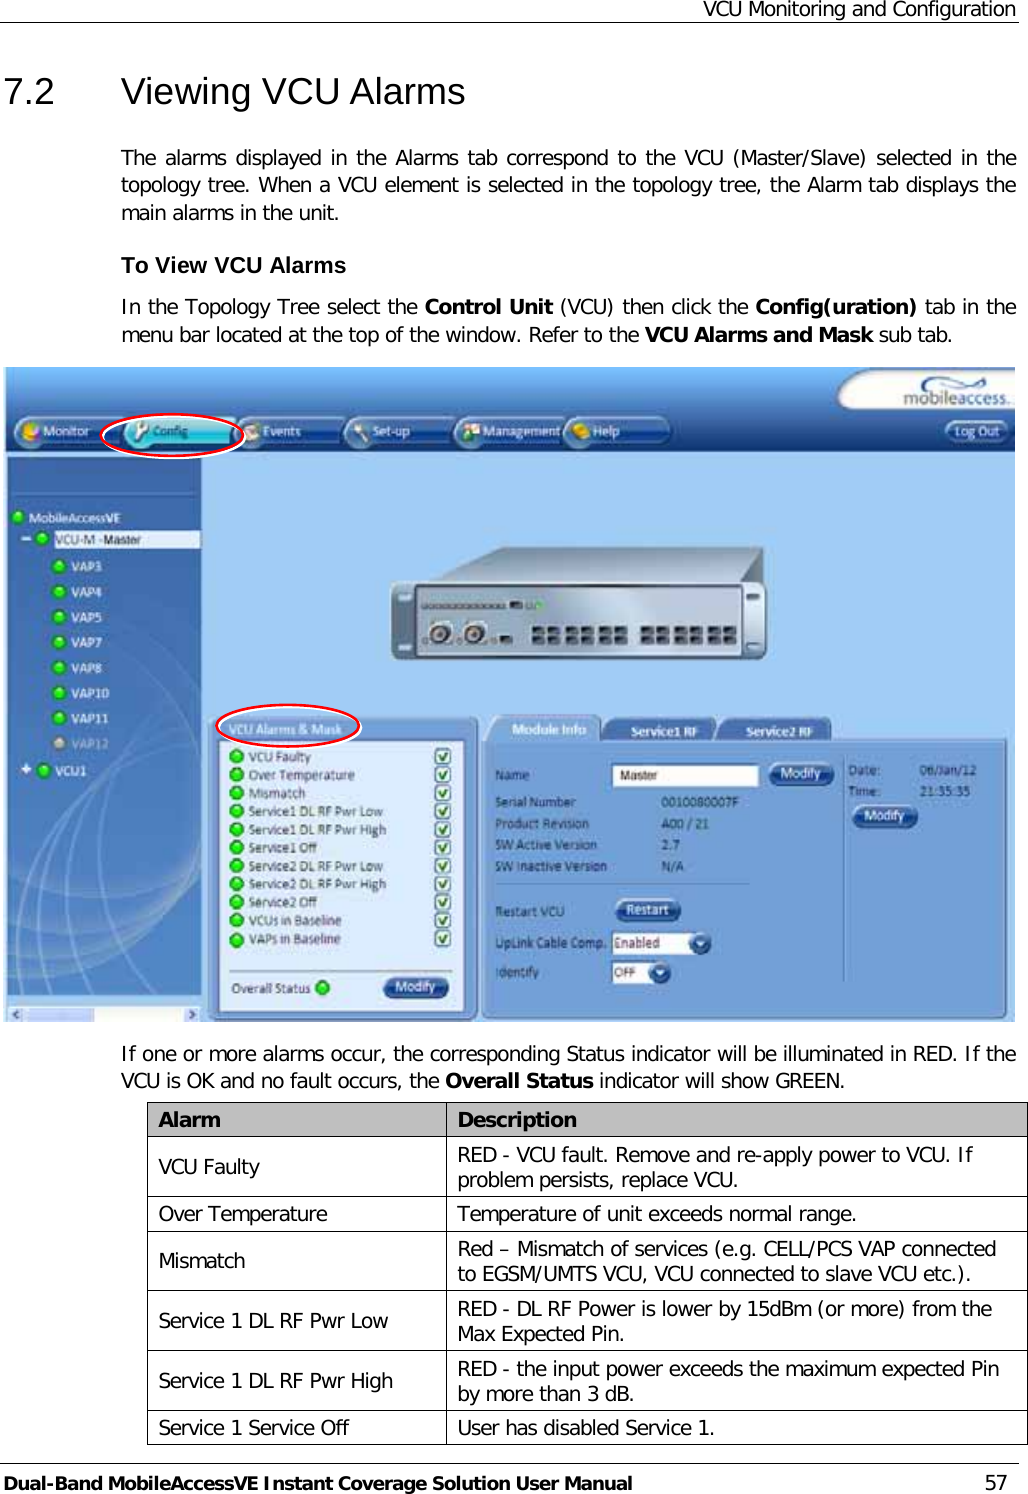 VCU Monitoring and Configuration Dual-Band MobileAccessVE Instant Coverage Solution User Manual 57 7.2  Viewing VCU Alarms The alarms displayed in the Alarms tab correspond to the VCU (Master/Slave) selected in the topology tree. When a VCU element is selected in the topology tree, the Alarm tab displays the main alarms in the unit. To View VCU Alarms  In the Topology Tree select the Control Unit (VCU) then click the Config(uration) tab in the menu bar located at the top of the window. Refer to the VCU Alarms and Mask sub tab.  If one or more alarms occur, the corresponding Status indicator will be illuminated in RED. If the VCU is OK and no fault occurs, the Overall Status indicator will show GREEN. Alarm Description VCU Faulty RED - VCU fault. Remove and re-apply power to VCU. If problem persists, replace VCU. Over Temperature Temperature of unit exceeds normal range. Mismatch  Red – Mismatch of services (e.g. CELL/PCS VAP connected to EGSM/UMTS VCU, VCU connected to slave VCU etc.). Service 1 DL RF Pwr Low RED - DL RF Power is lower by 15dBm (or more) from the Max Expected Pin. Service 1 DL RF Pwr High RED - the input power exceeds the maximum expected Pin by more than 3 dB. Service 1 Service Off User has disabled Service 1. 